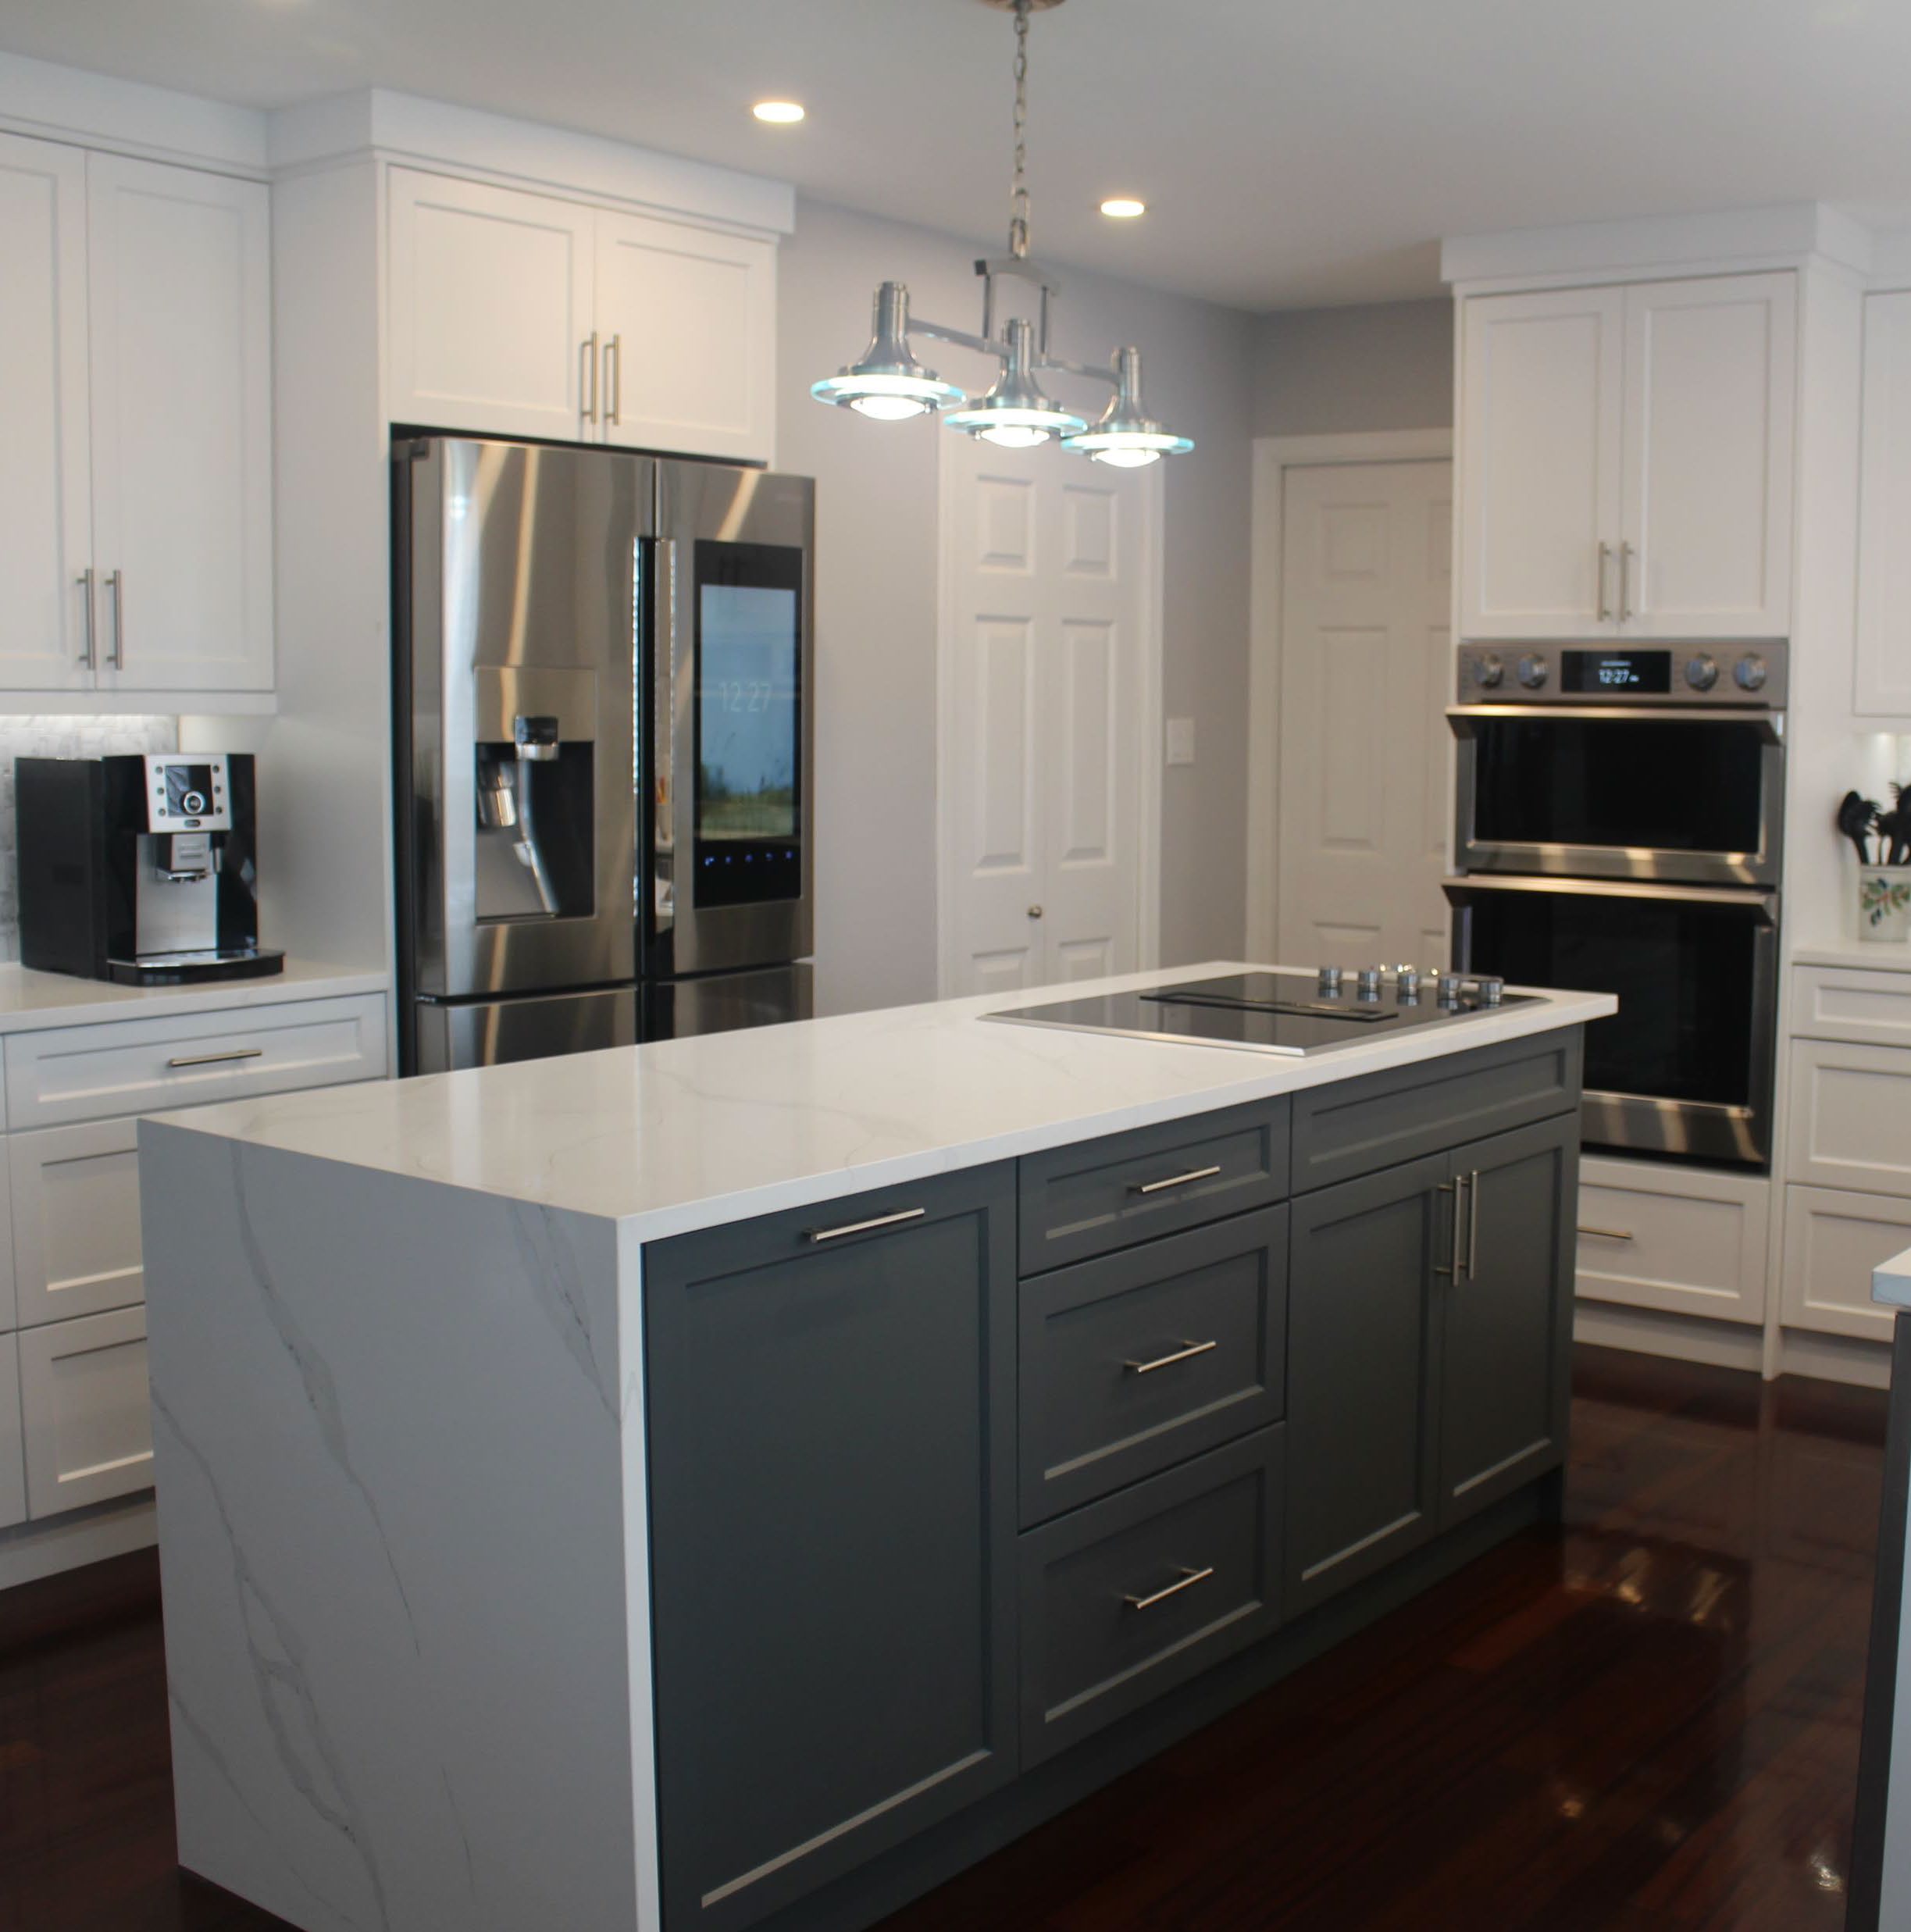 Custom-made kitchen cabinets with grey island cabinets and waterfall countertop